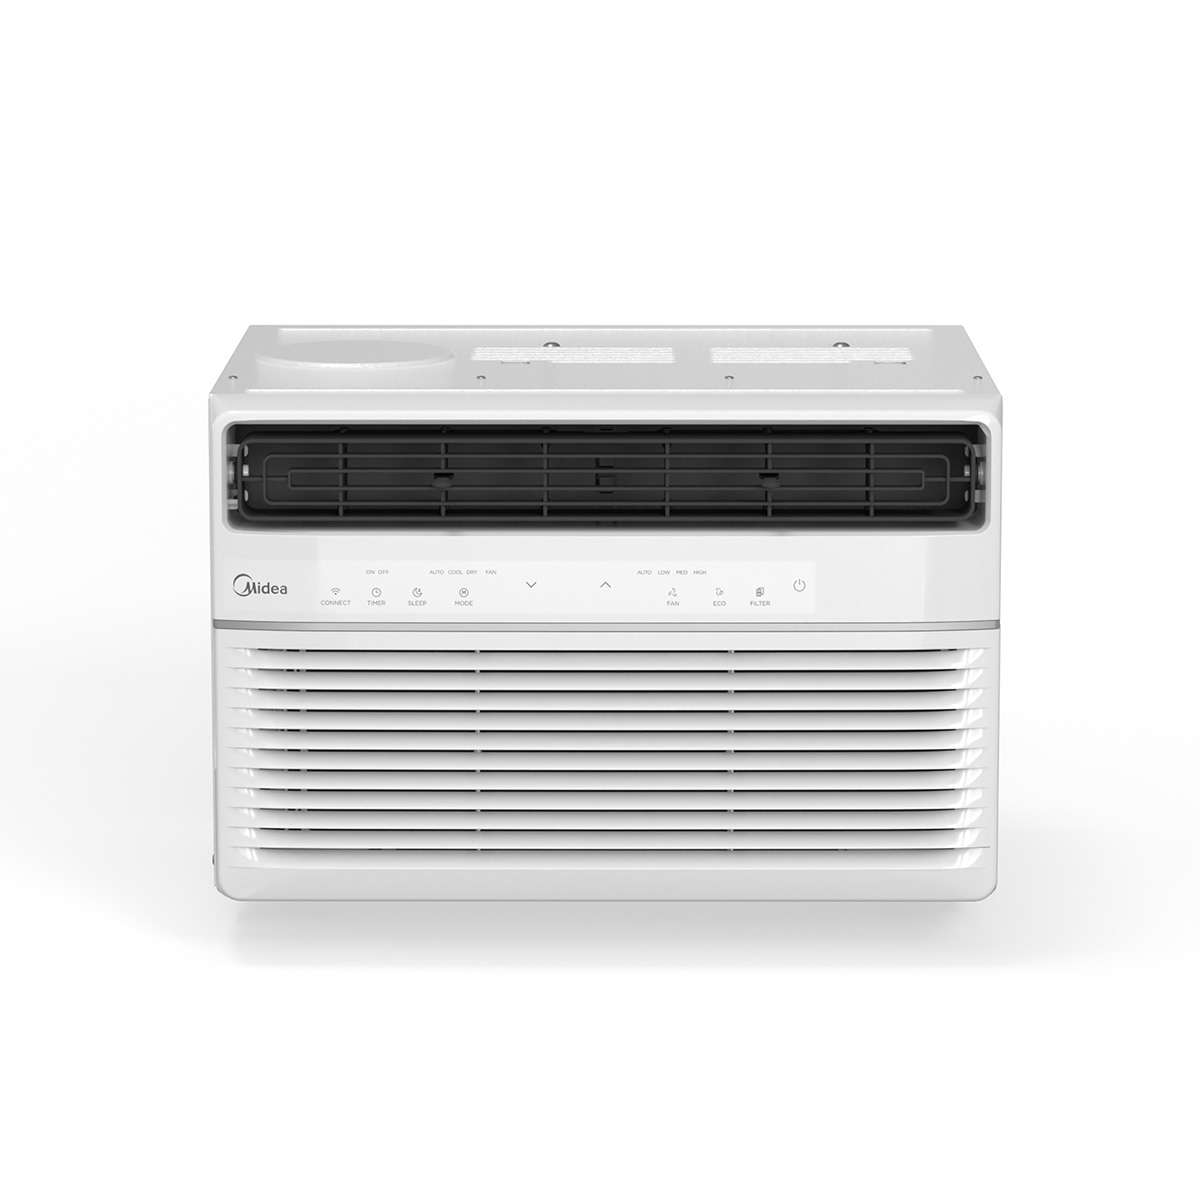 Midea Smart 8,000 BTU Window AC, 3 -in-1 Cools, Dehumidifies and Circulates, Washable Filter, Remote Control, up to 350 Sq. Ft.